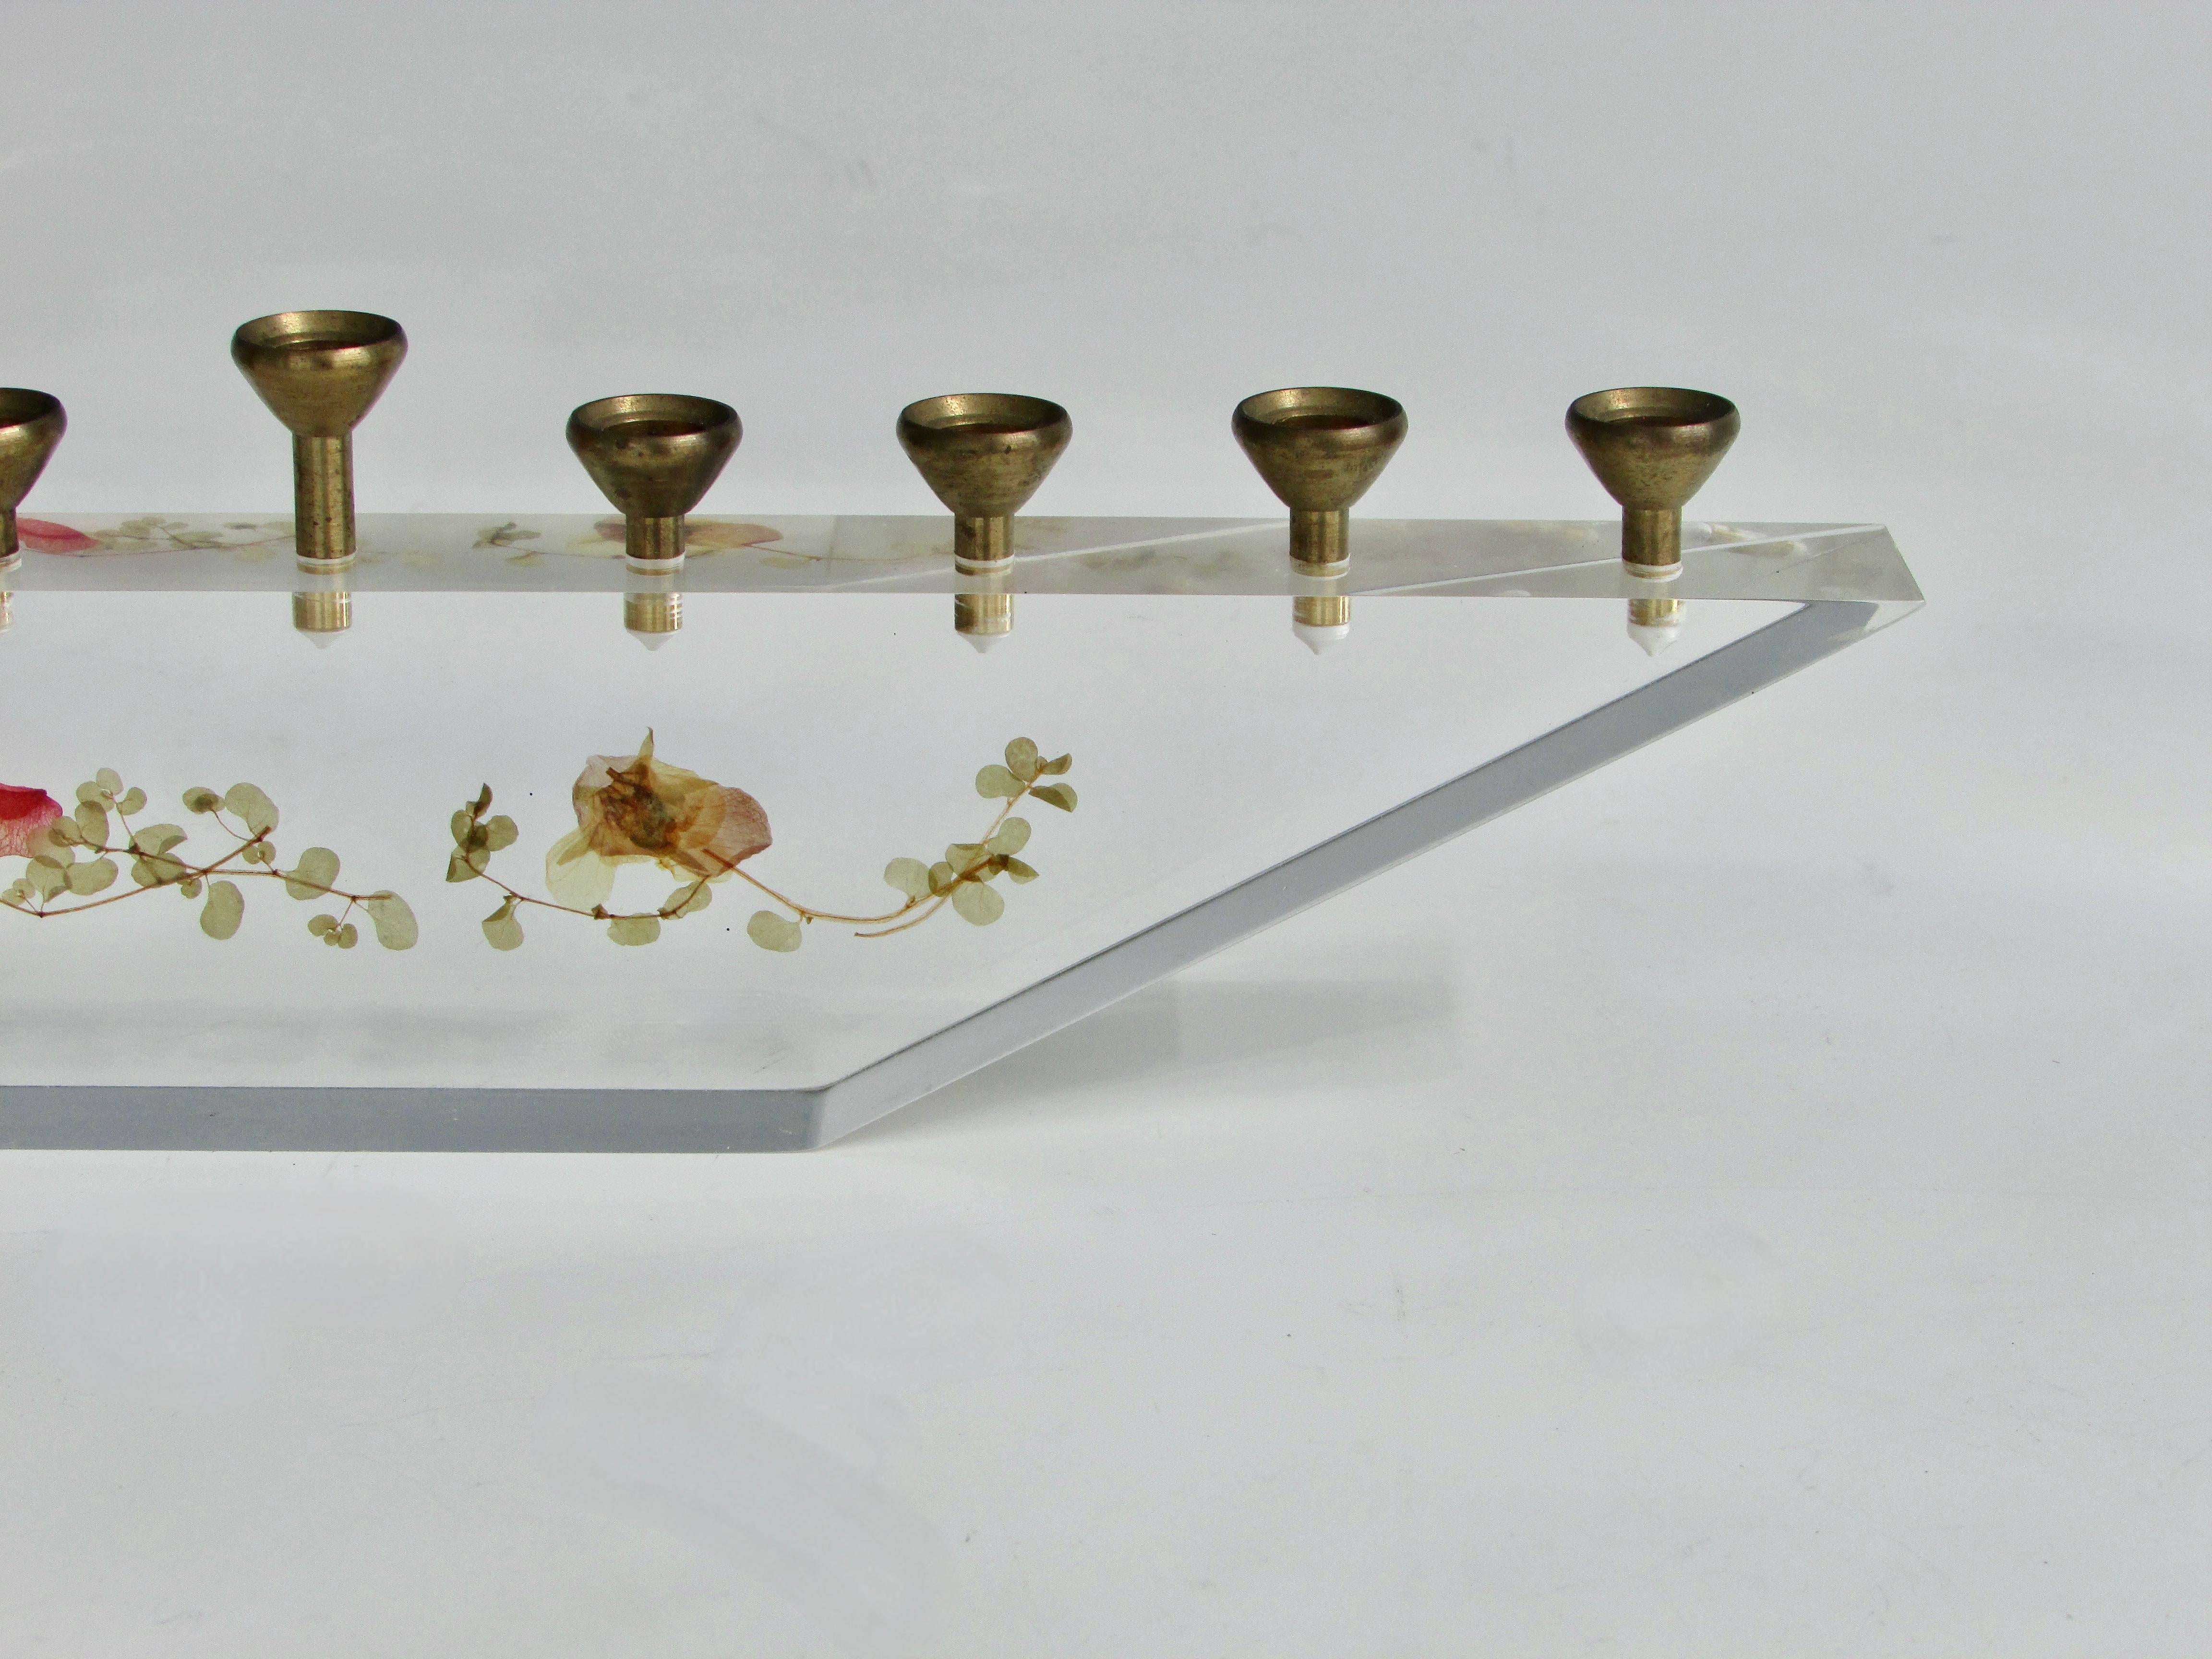 Israeli Nine Candle Modernist Menorah Set in Lucite Stand with Dried Floral Decoration For Sale